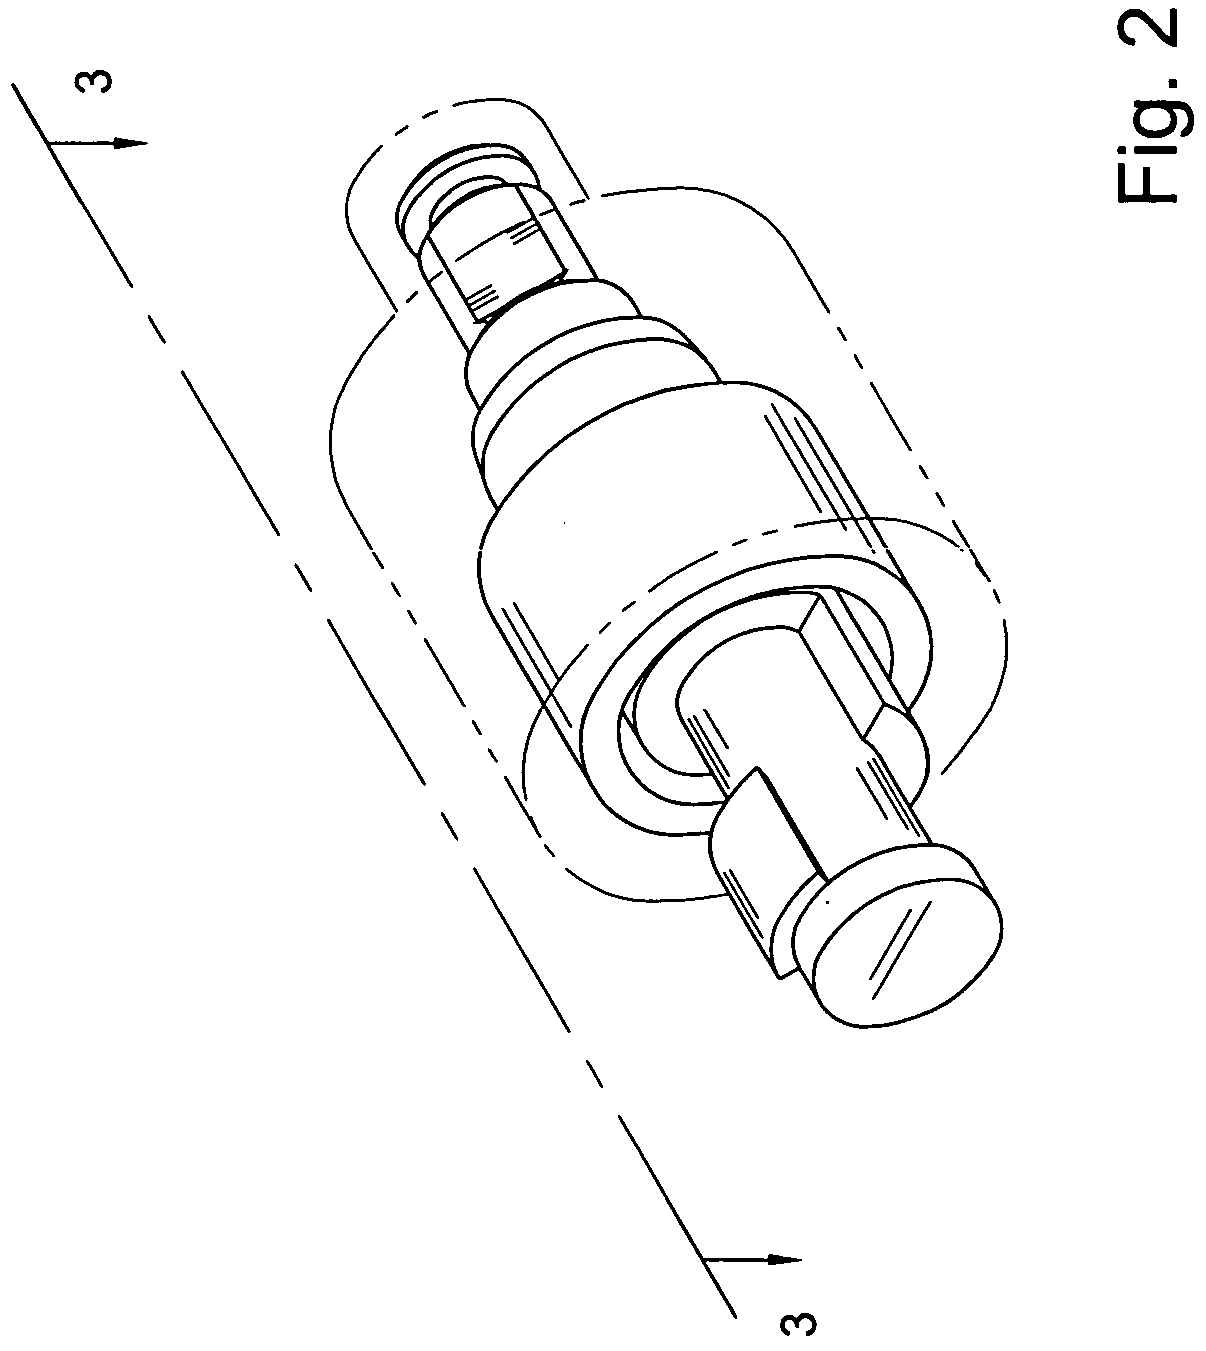 Stabilizing mechanism for output torque of a transmission member